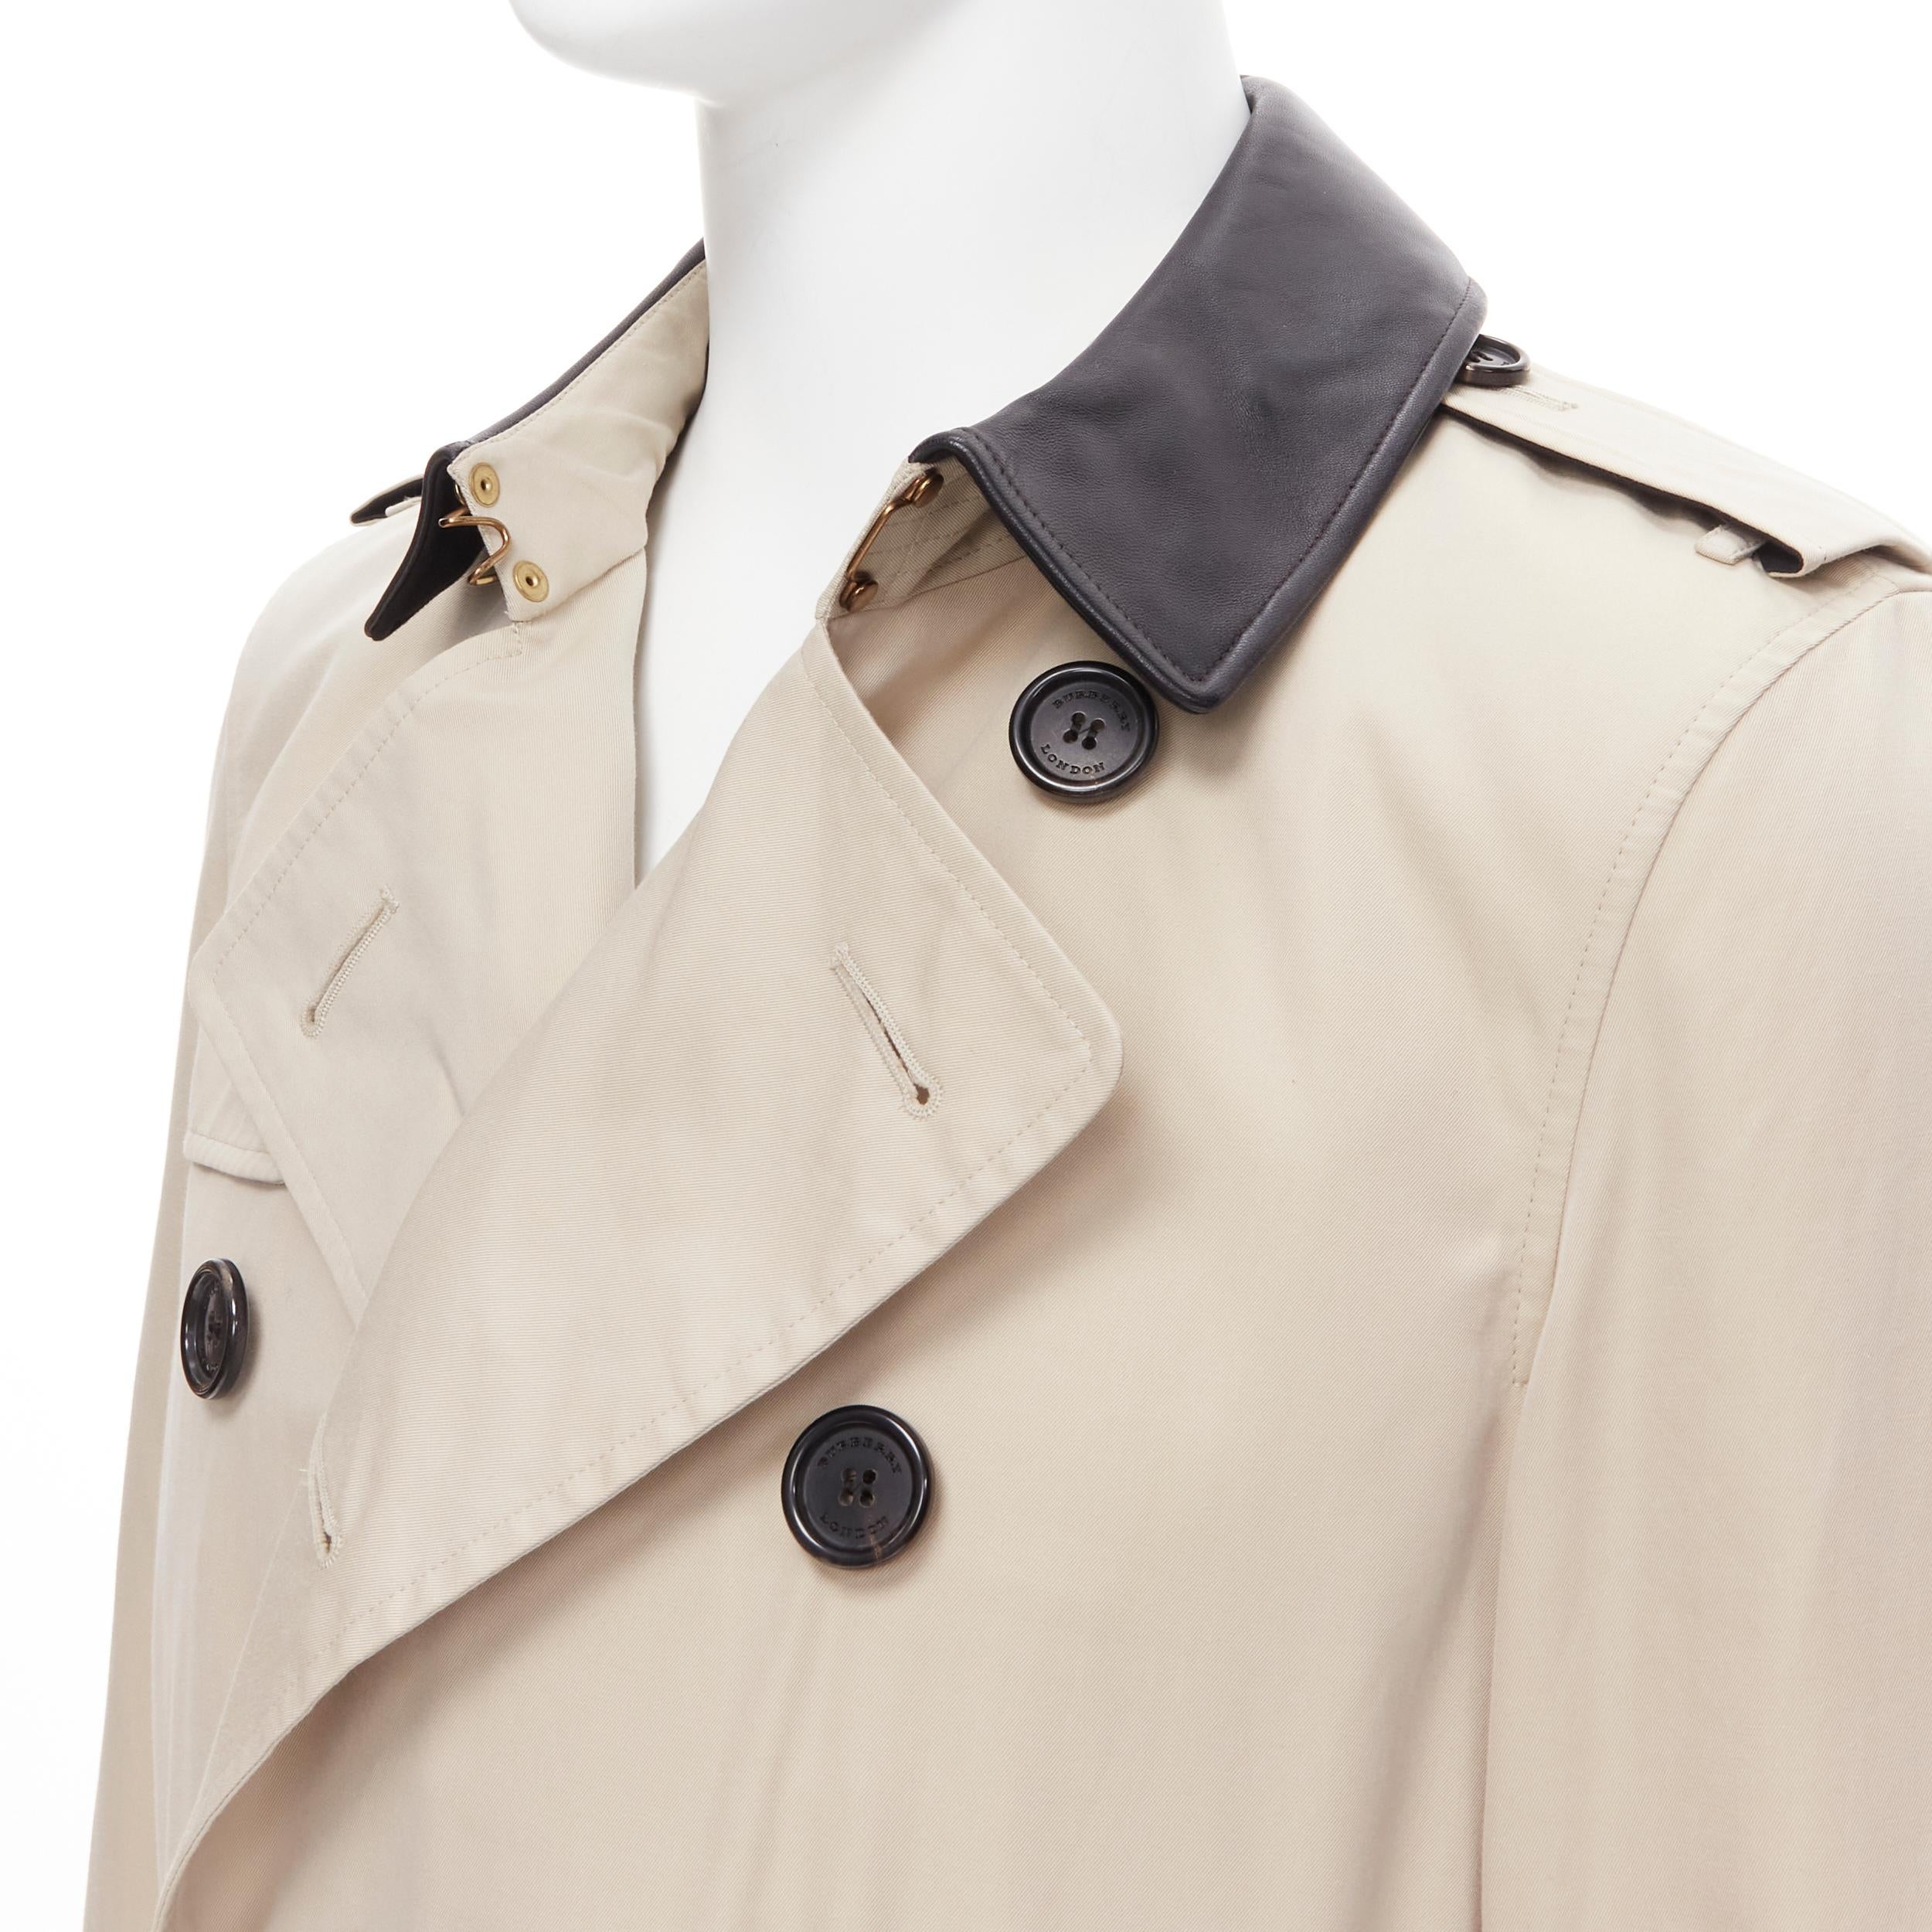 BURBERRY black leather collar beige cotton double breasted trench EU48 M 
Reference: TGAS/B01992 
Brand: Burberry Prorsu 
Material: Cotton 
Color: Beige 
Pattern: Solid 
Closure: Button 
Extra Detail: Leather collar. Double breasted. Detachable